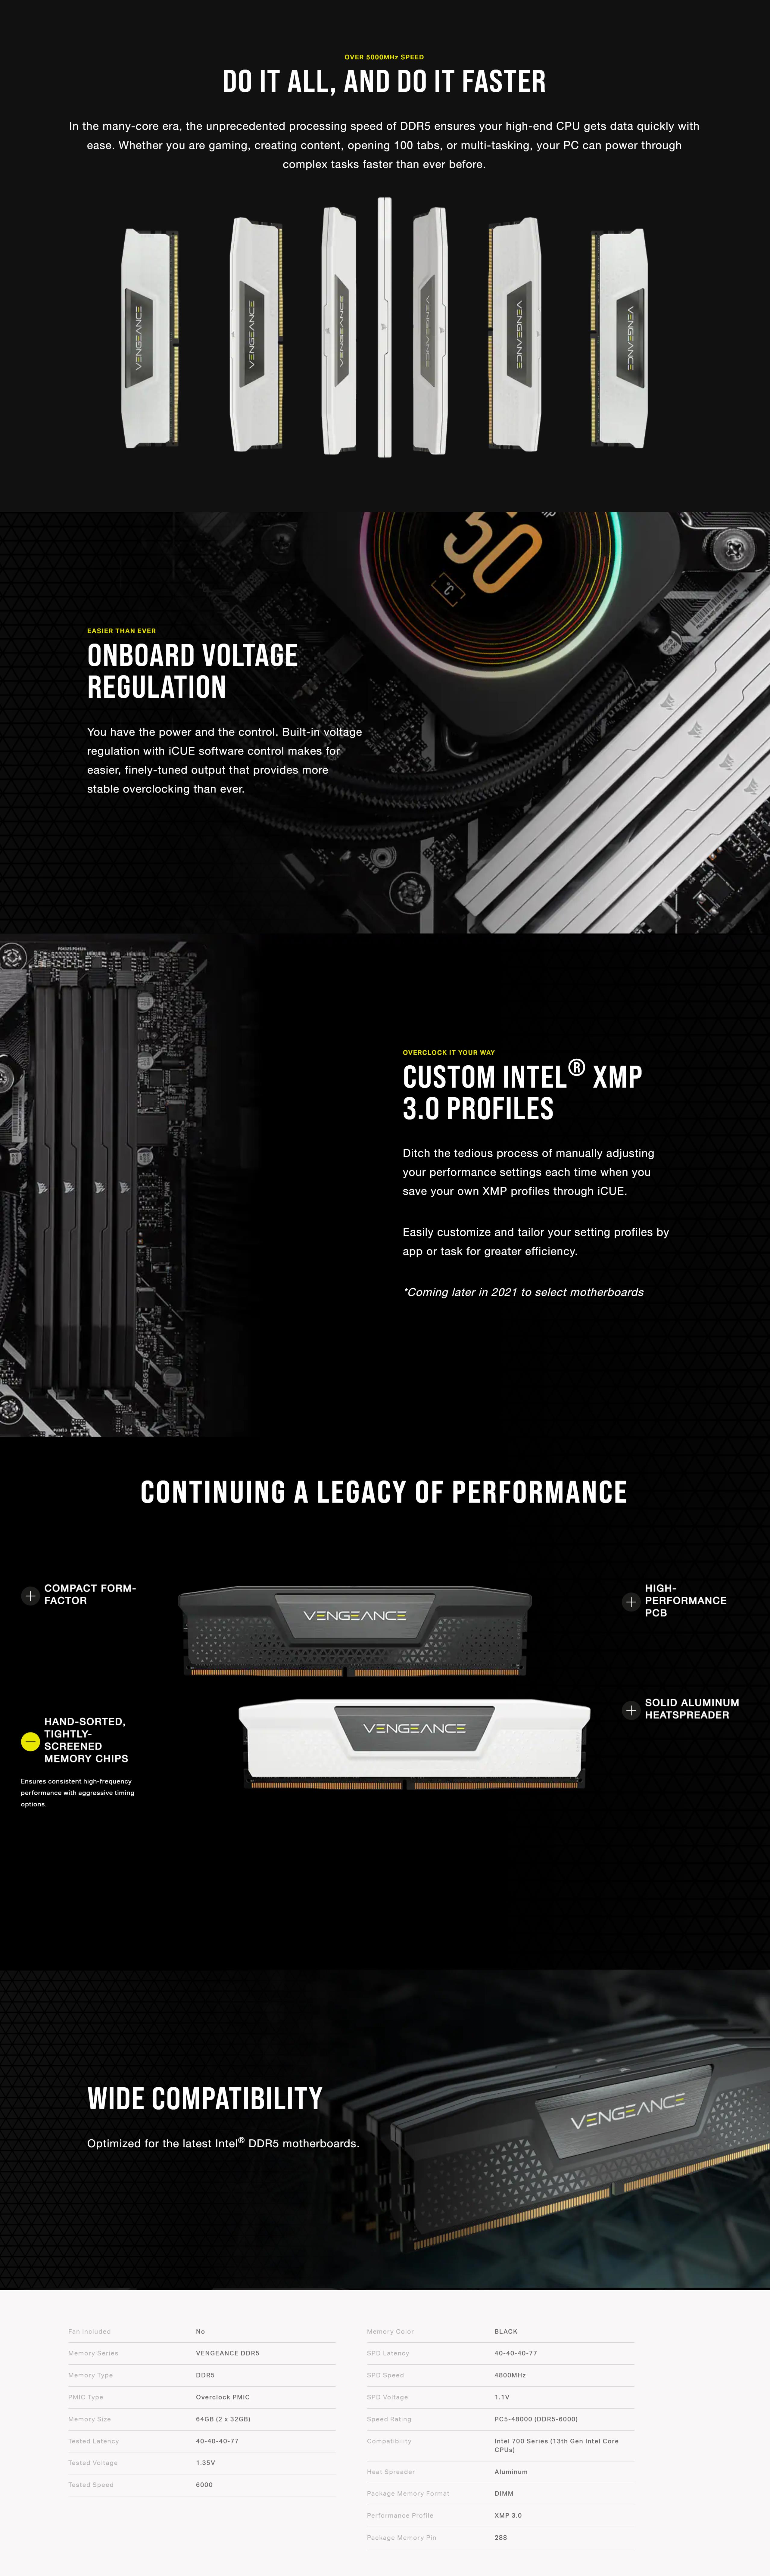 A large marketing image providing additional information about the product Corsair 64GB Kit (2x32GB) DDR5 Vengeance C40 6000MT/s - Black - Additional alt info not provided